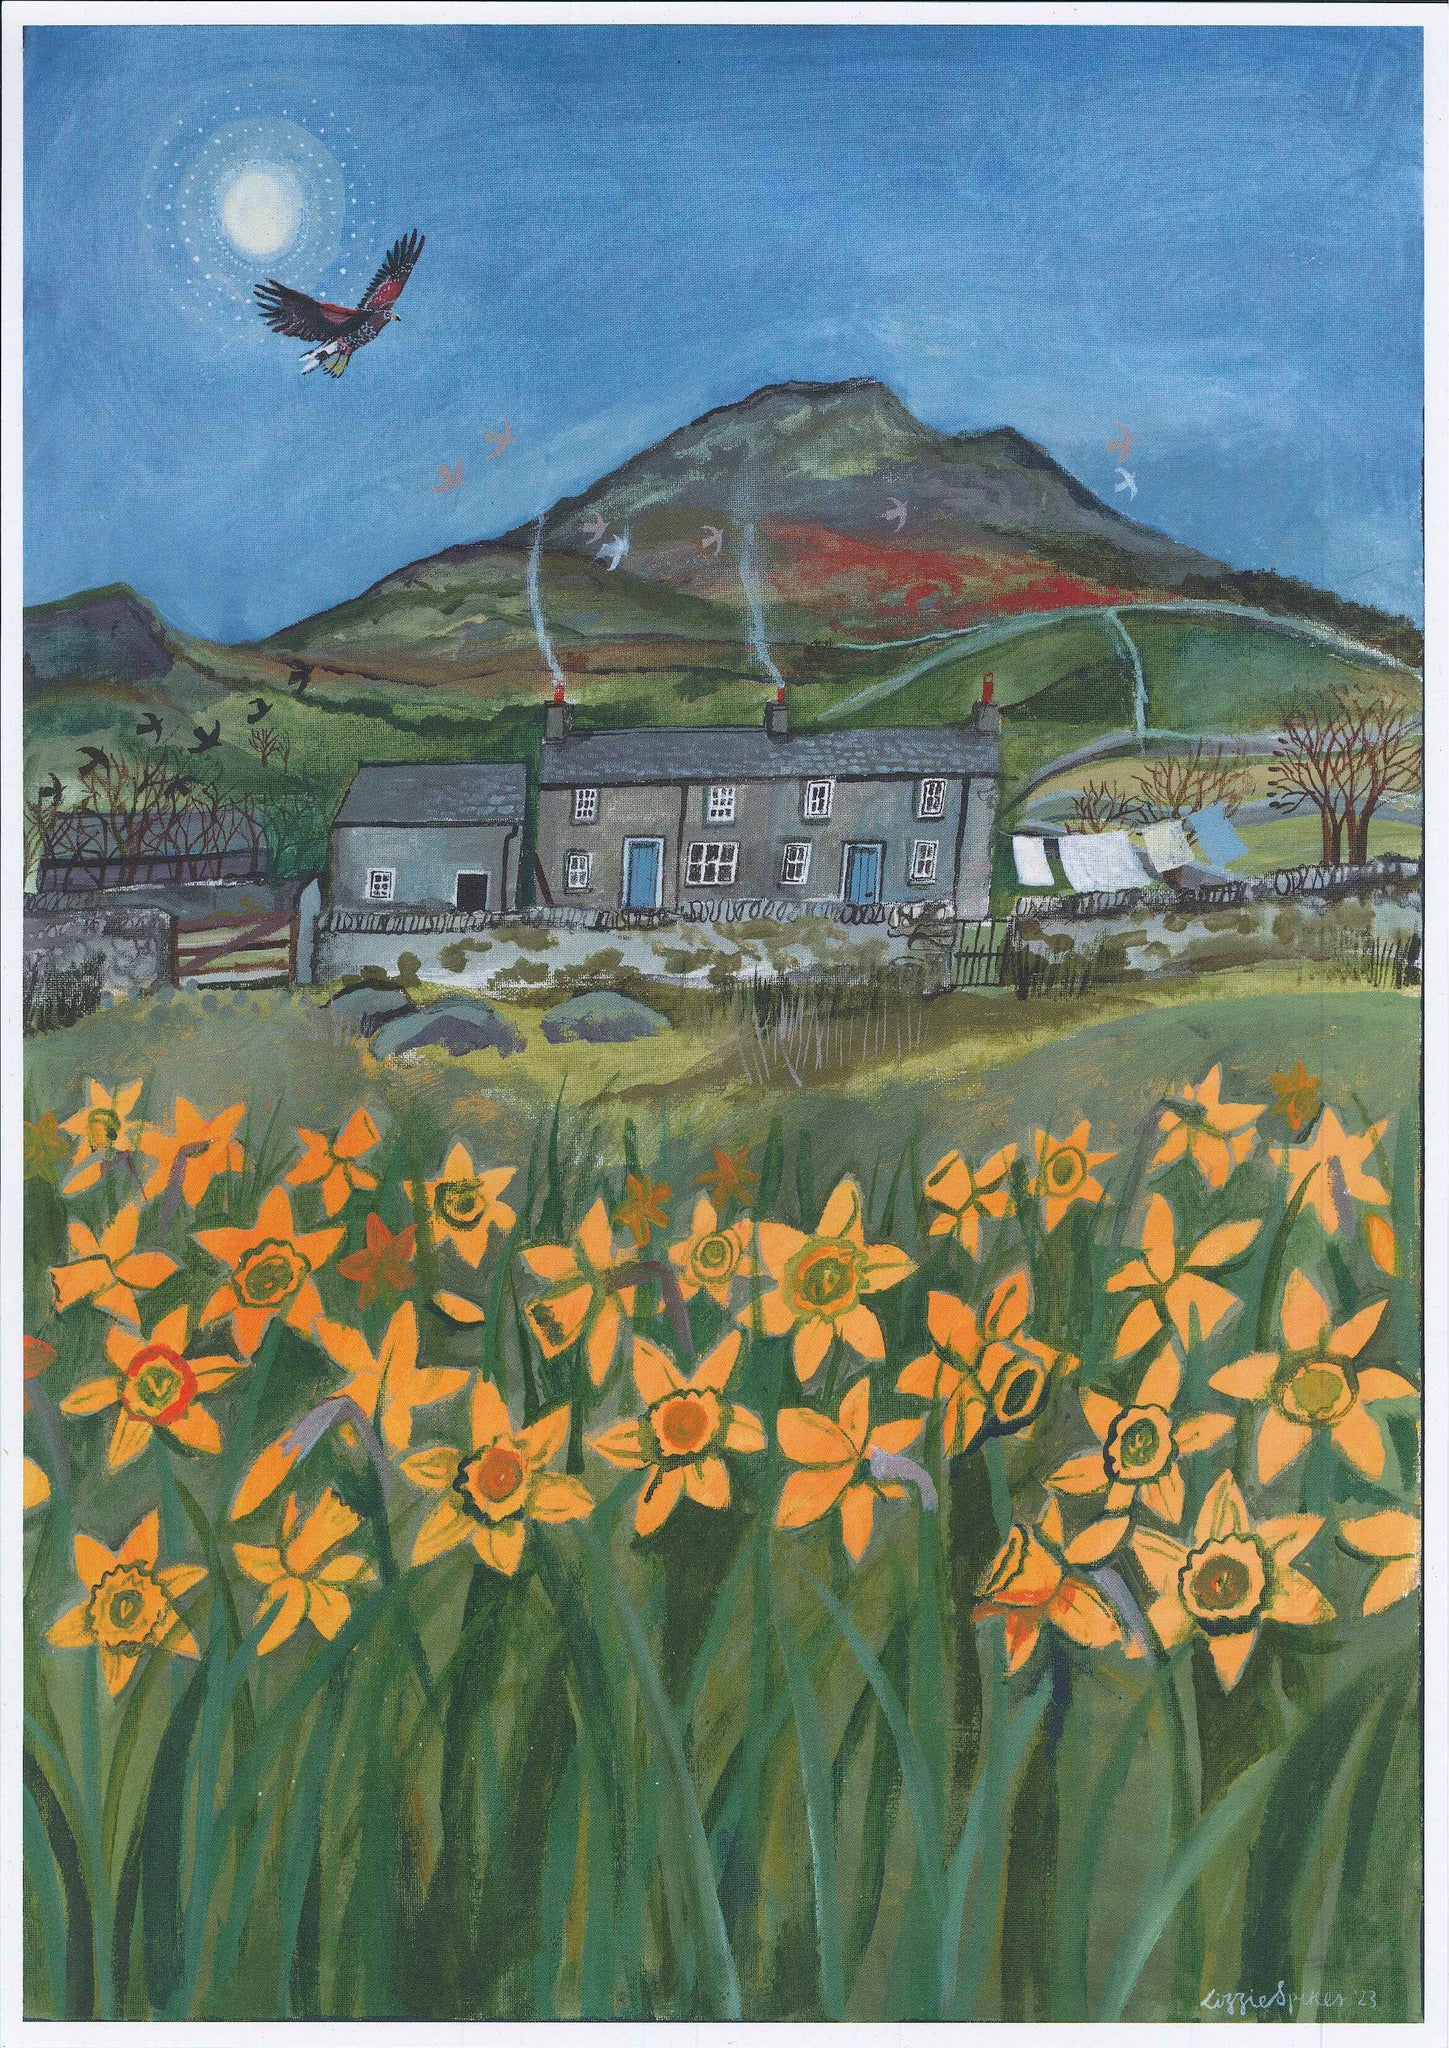 Poster 'Field of Daffodils' gan Lizzie Spikes